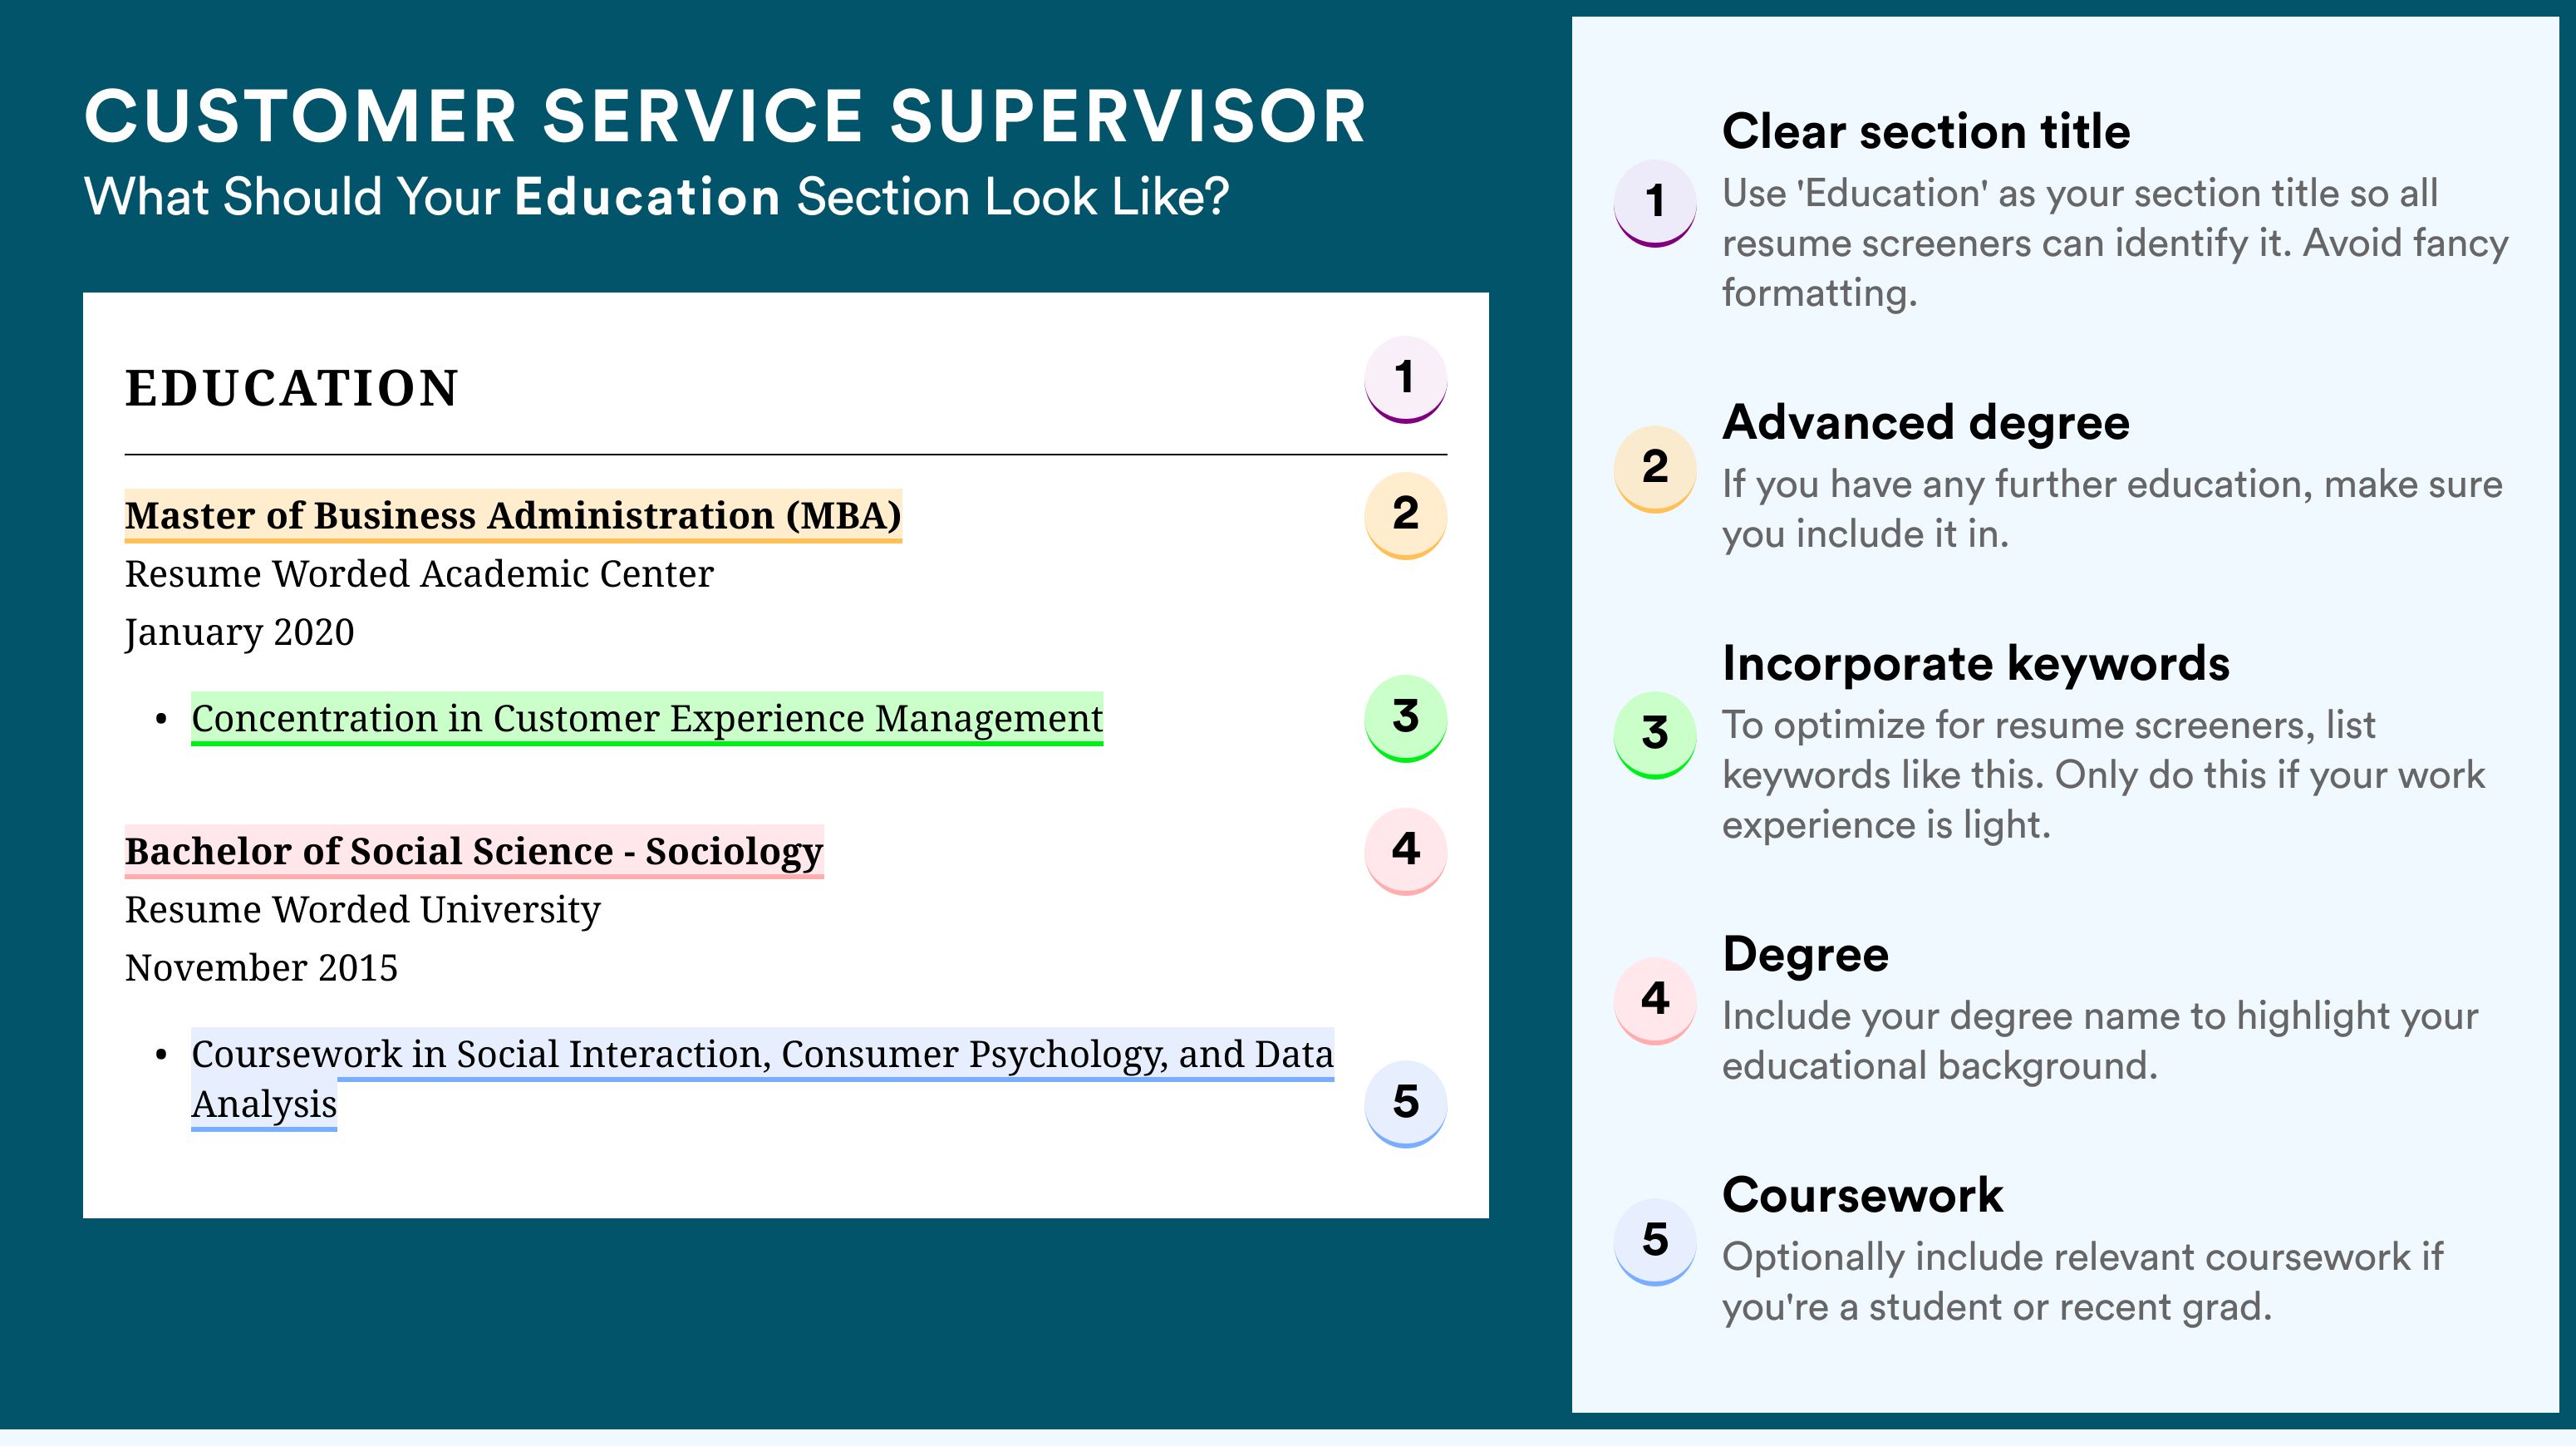 How To Write An Education Section - Customer Service Supervisor Roles